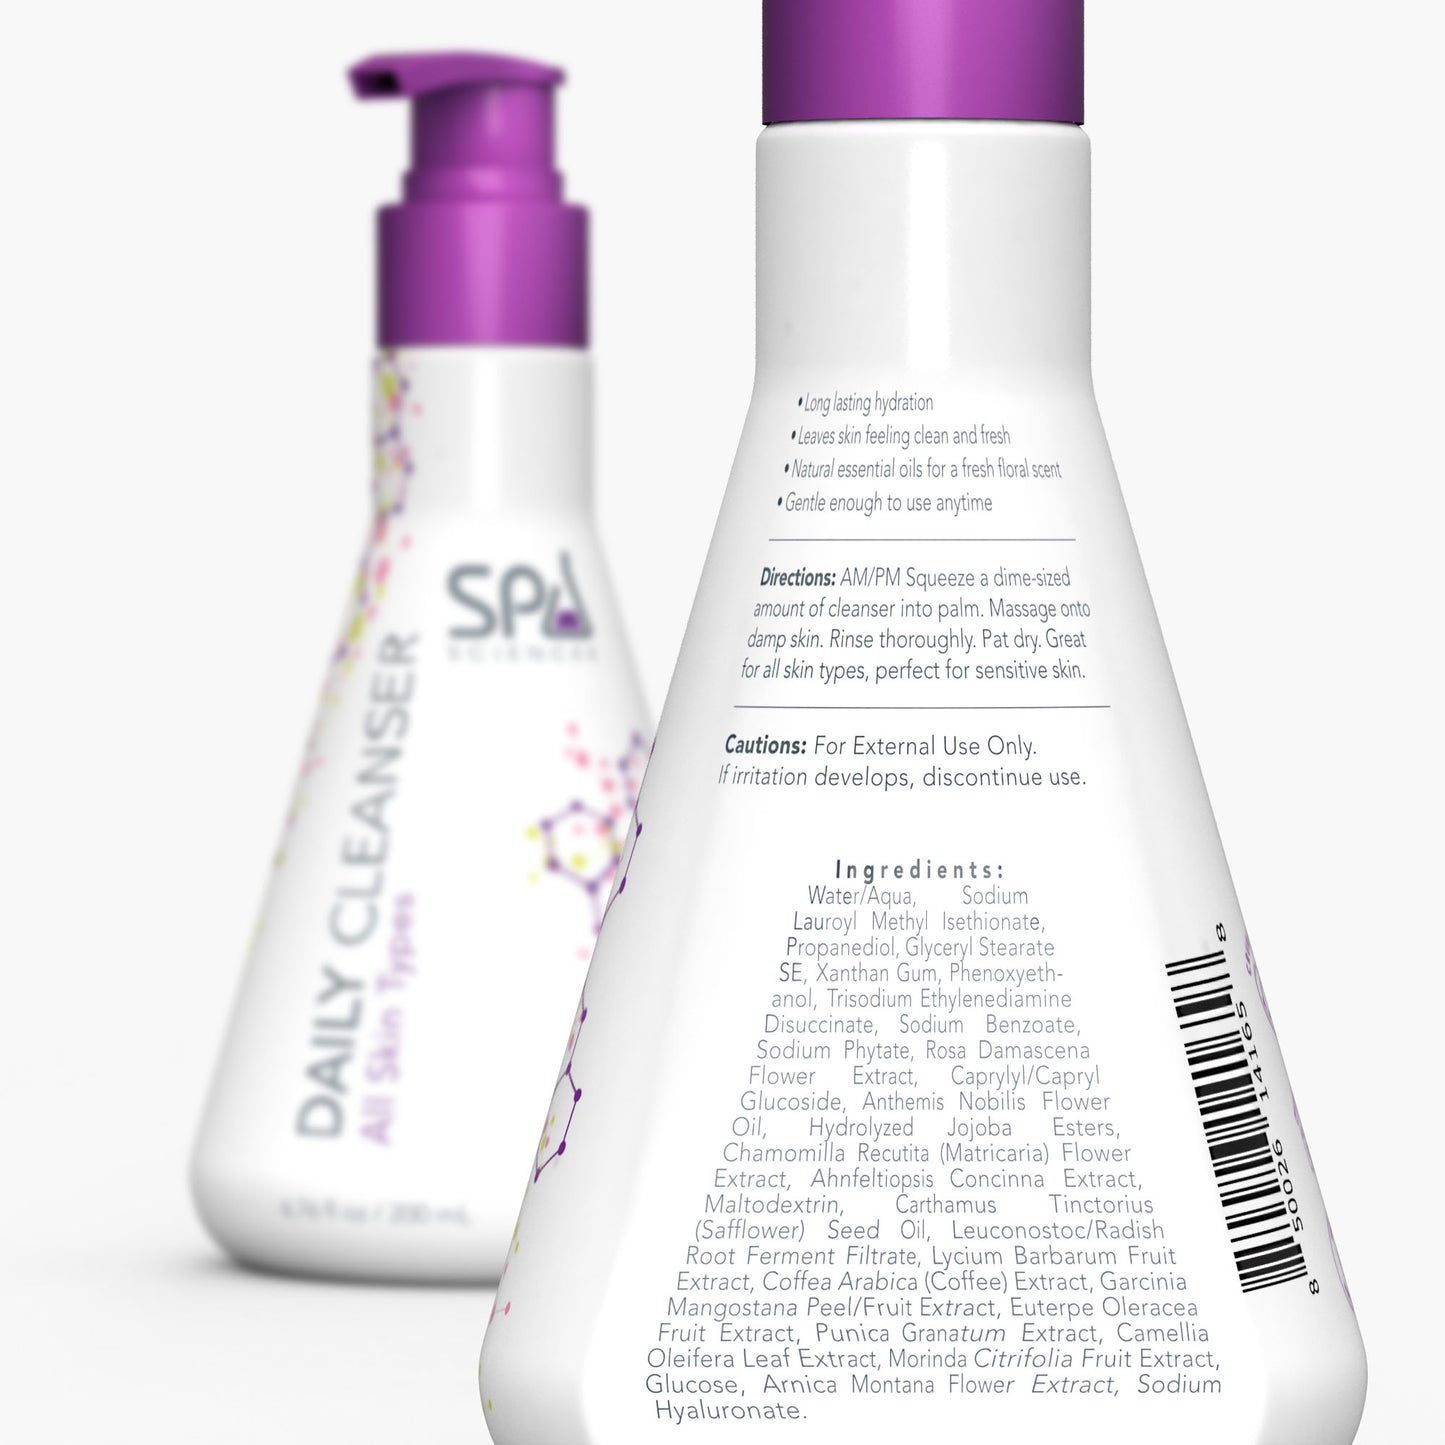 A bottle of Super Cleanser with a purple Spa Sciences bottle on it.